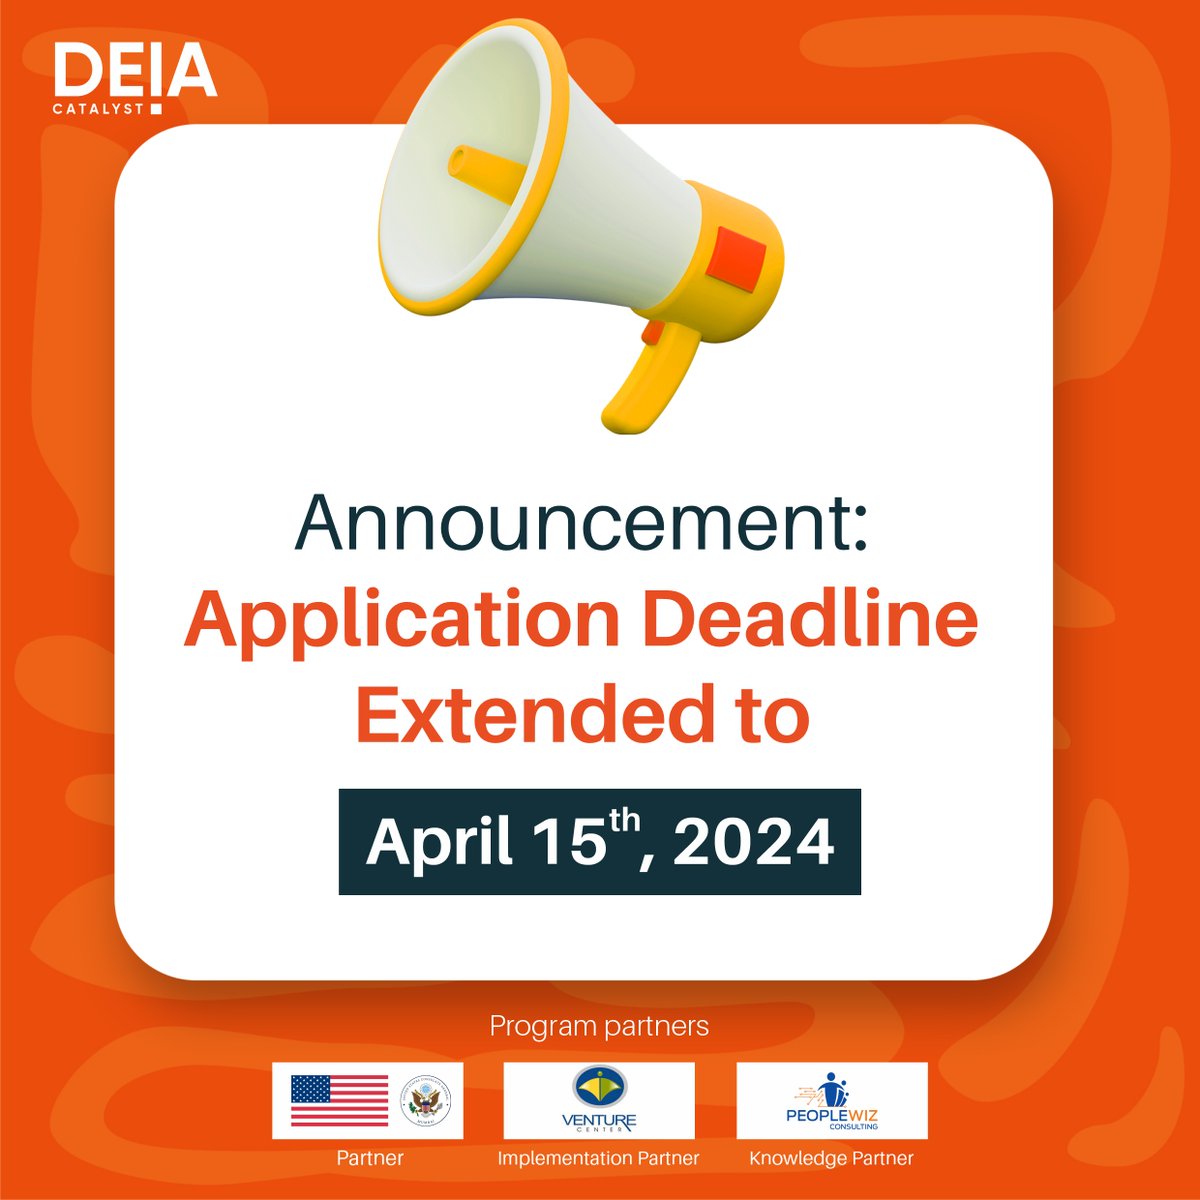 In view of the numerous inquiries & to accommodate those who haven't had the chance to apply yet, We're excited to announce that we've extended the application deadline to April 15th, 2024. Don't miss out on this extended opportunity! Apply now - deiacatalyst.org #DEIA